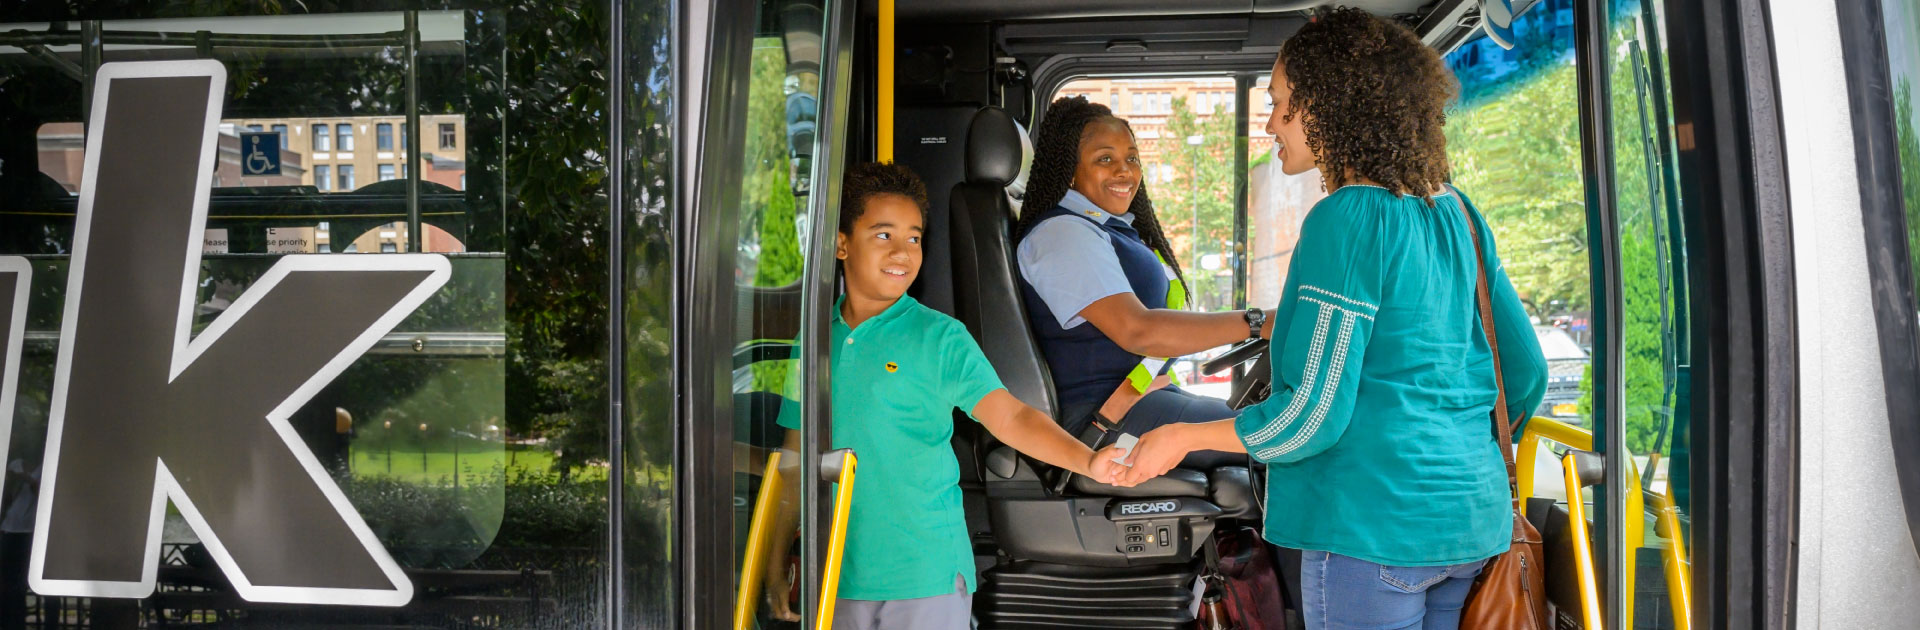 A woman and child board a bus. The bus driver is smiling at them.